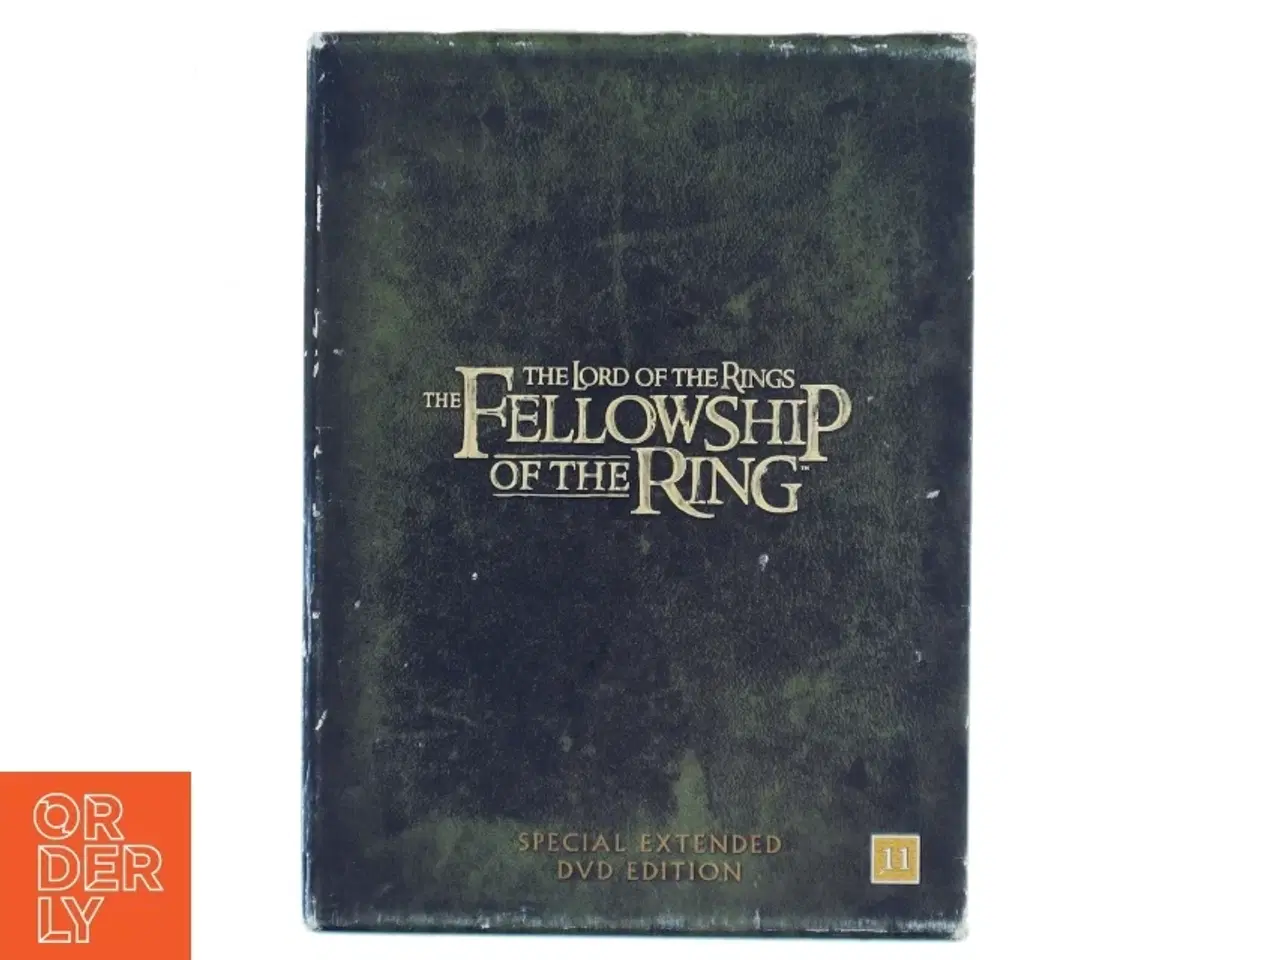 Billede 1 - The Fellowship Of The Ring (DVD)